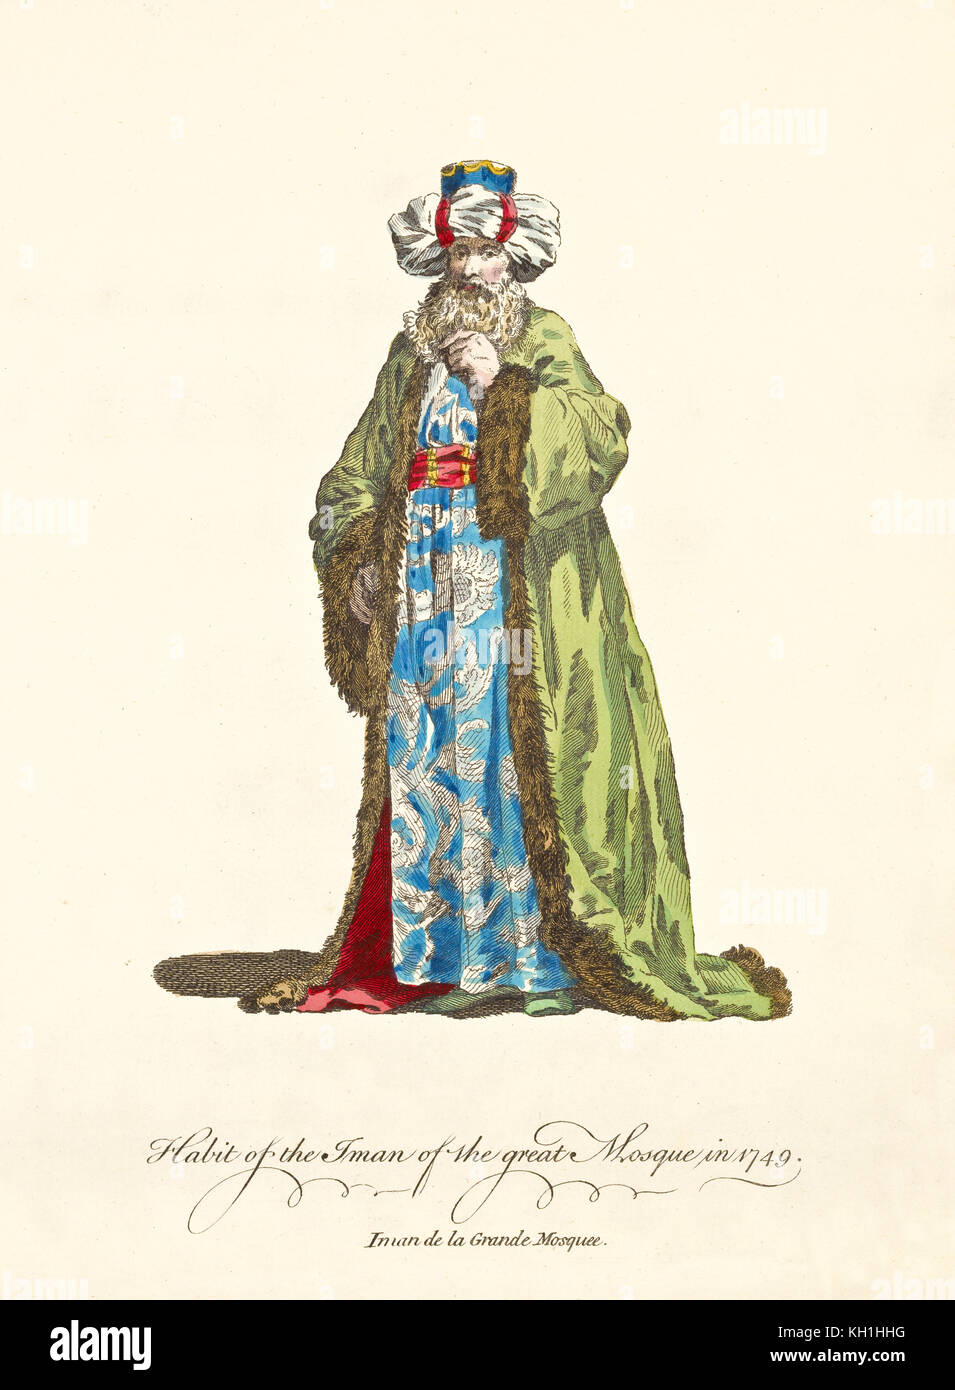 Imam of the Great Mosque in traditional dresses in 1749. Long green fur coat, blue tunic with white decorations, turban, beard. 1757-1772 Stock Photo